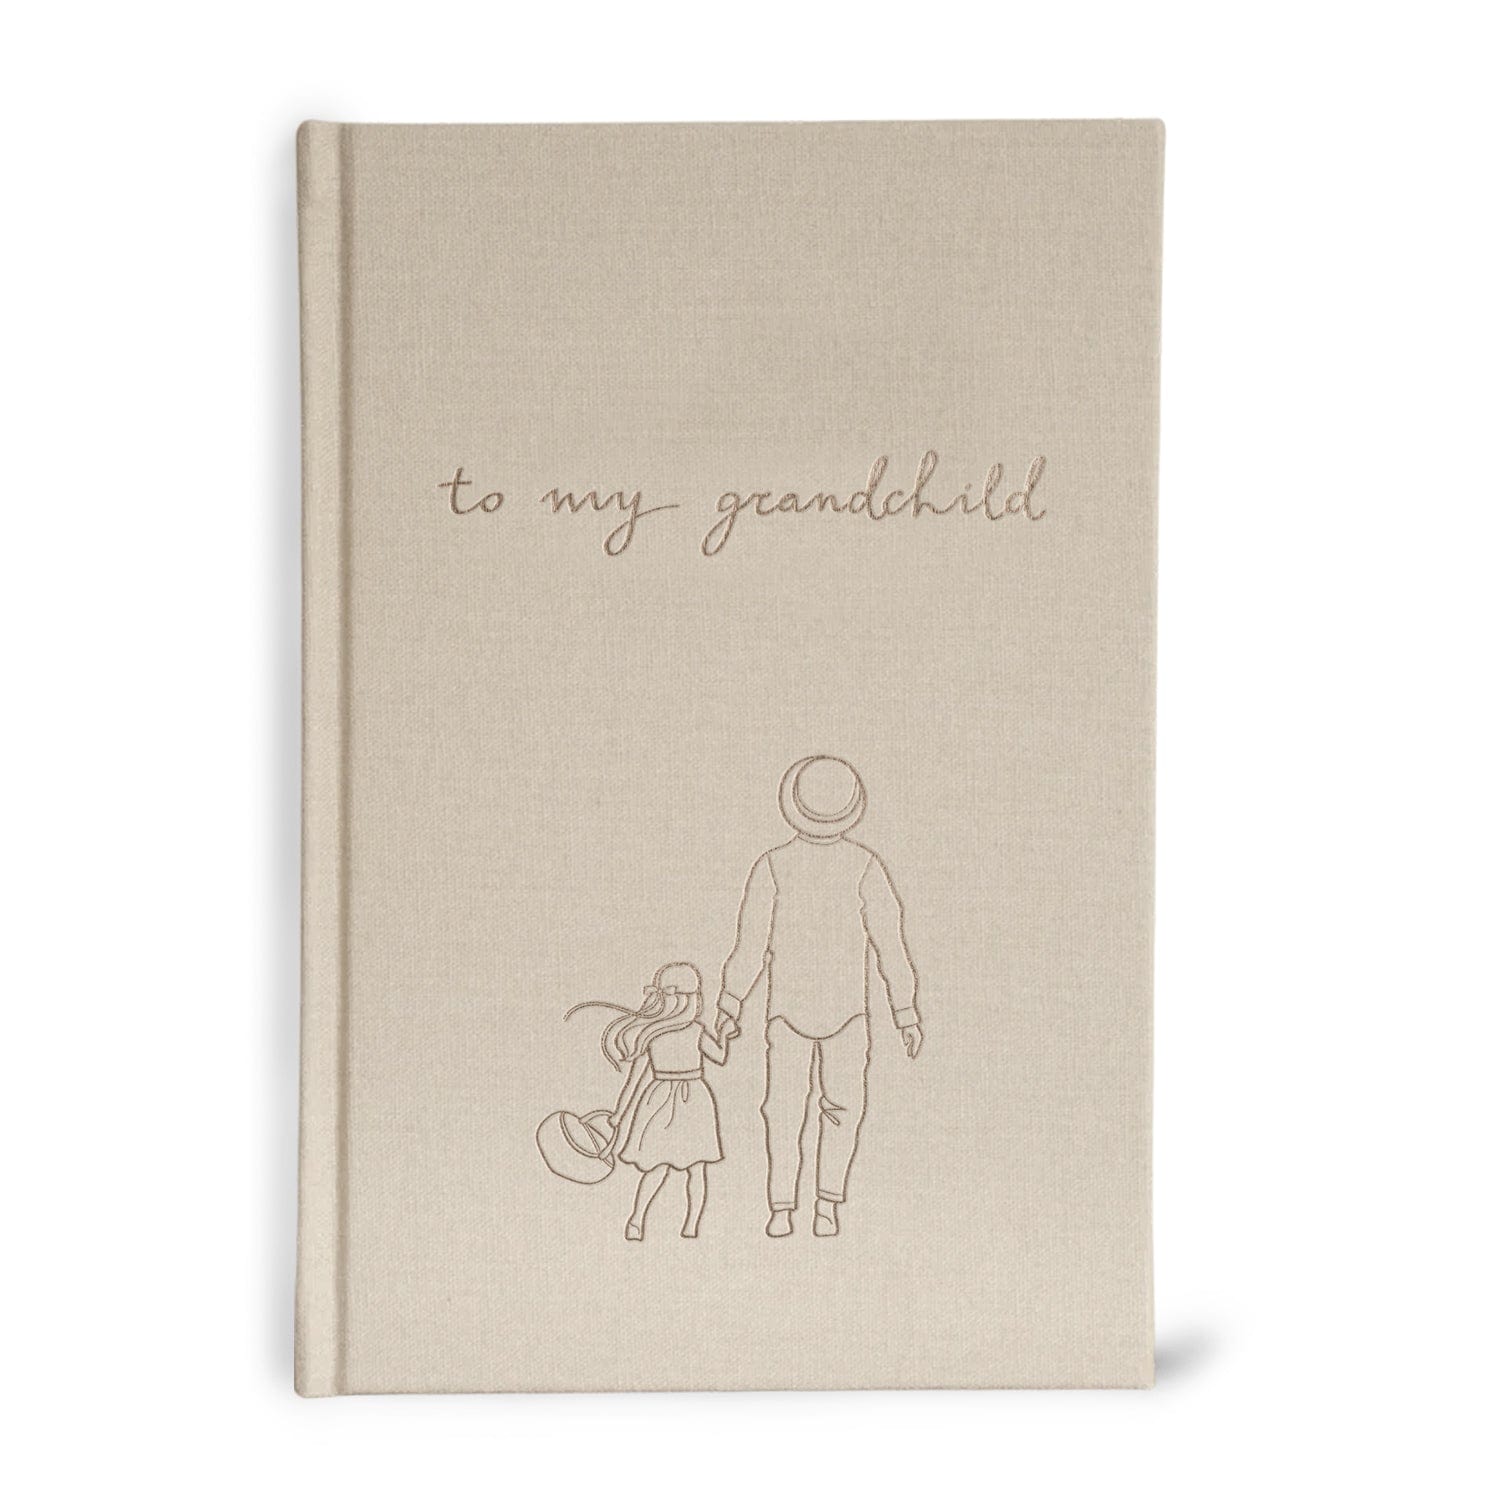 Forget Me Not Childrens Books Grandparents Journal - To My Grandchild (Illustrated)